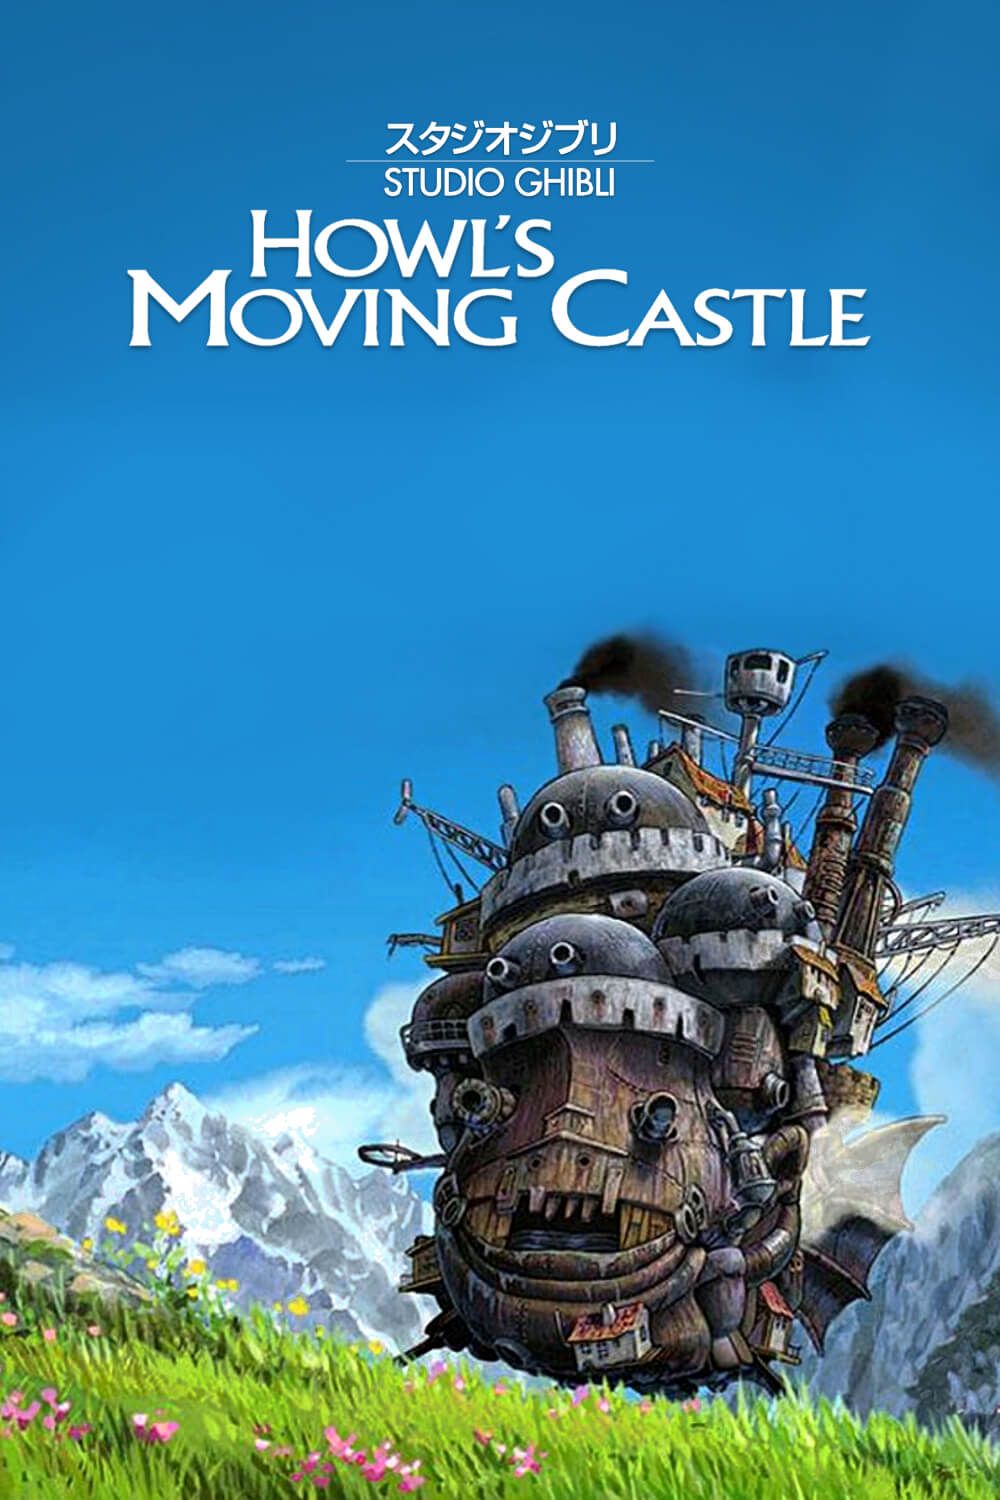 Watch Howl's Moving Castle today, it's one of the best Studio Ghibli movies for 8+ year olds.